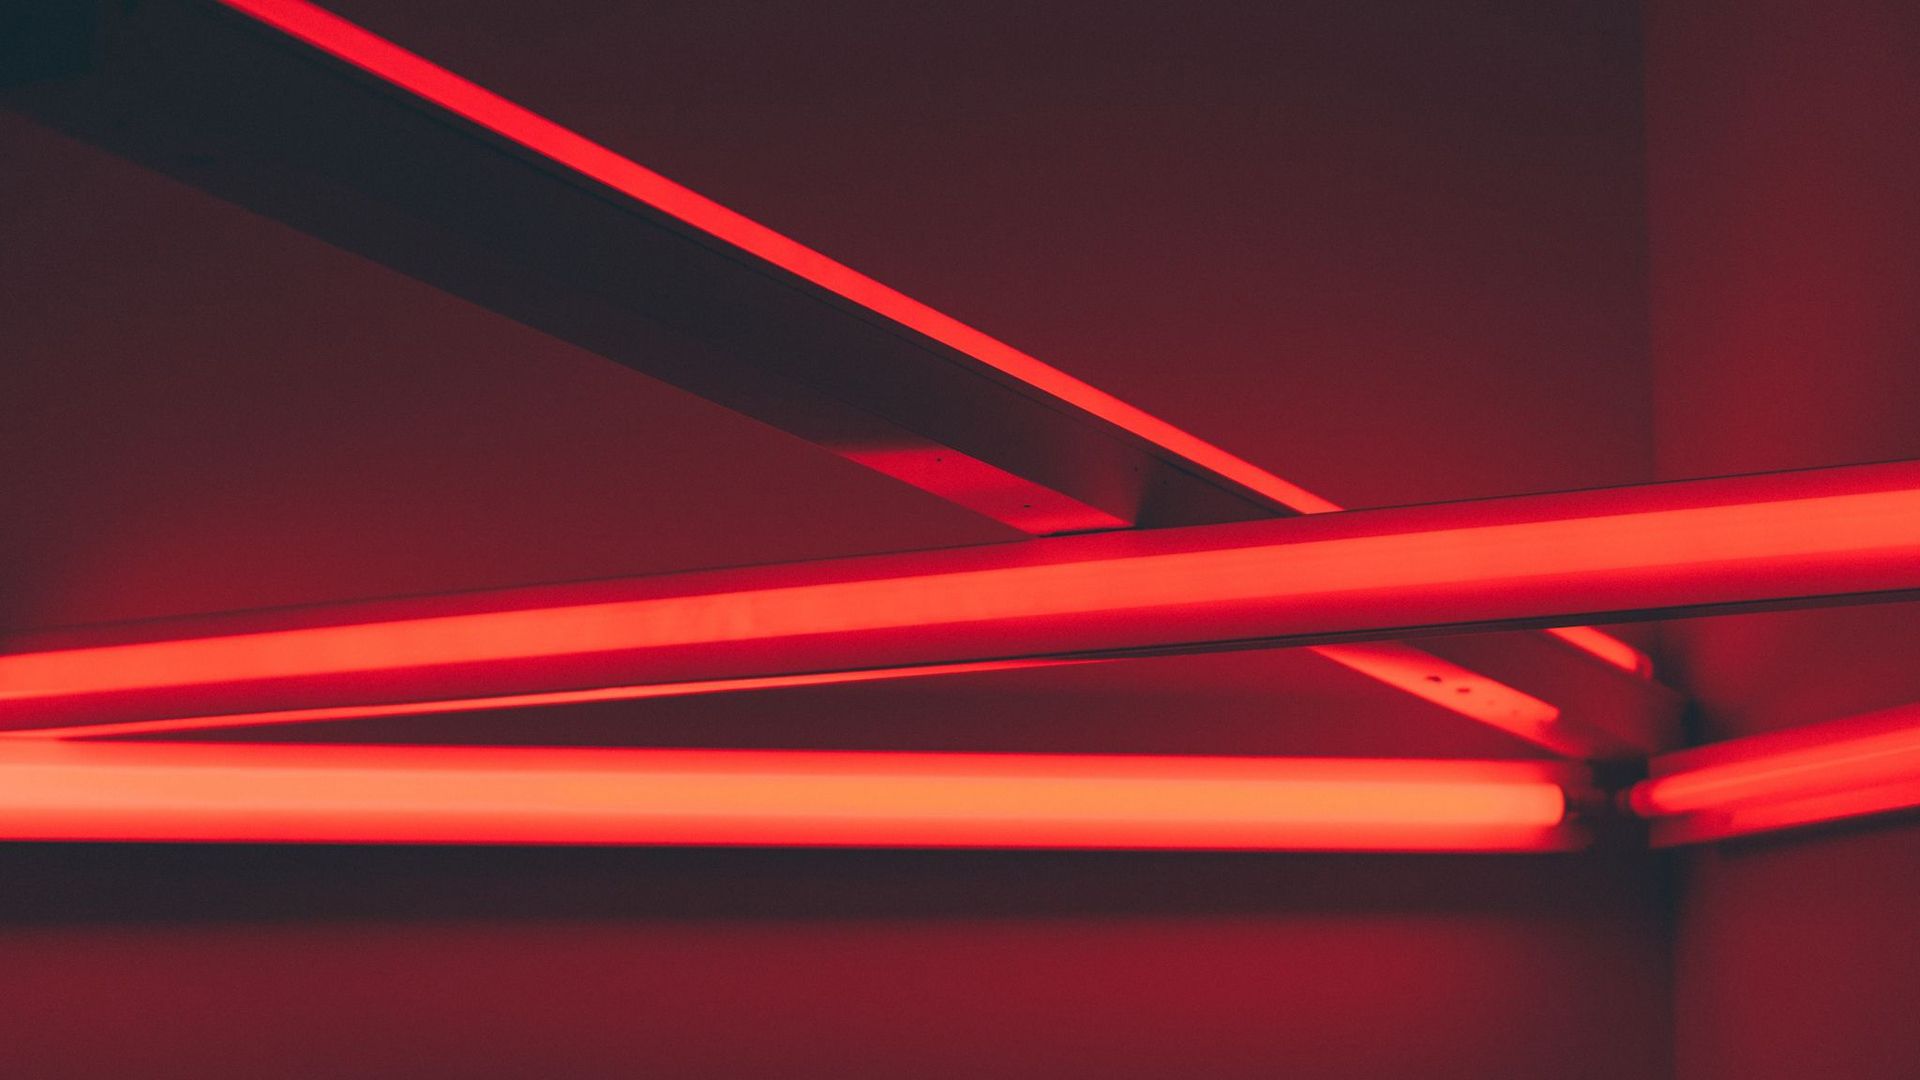 Red neon lights on a red wall - Red, light red